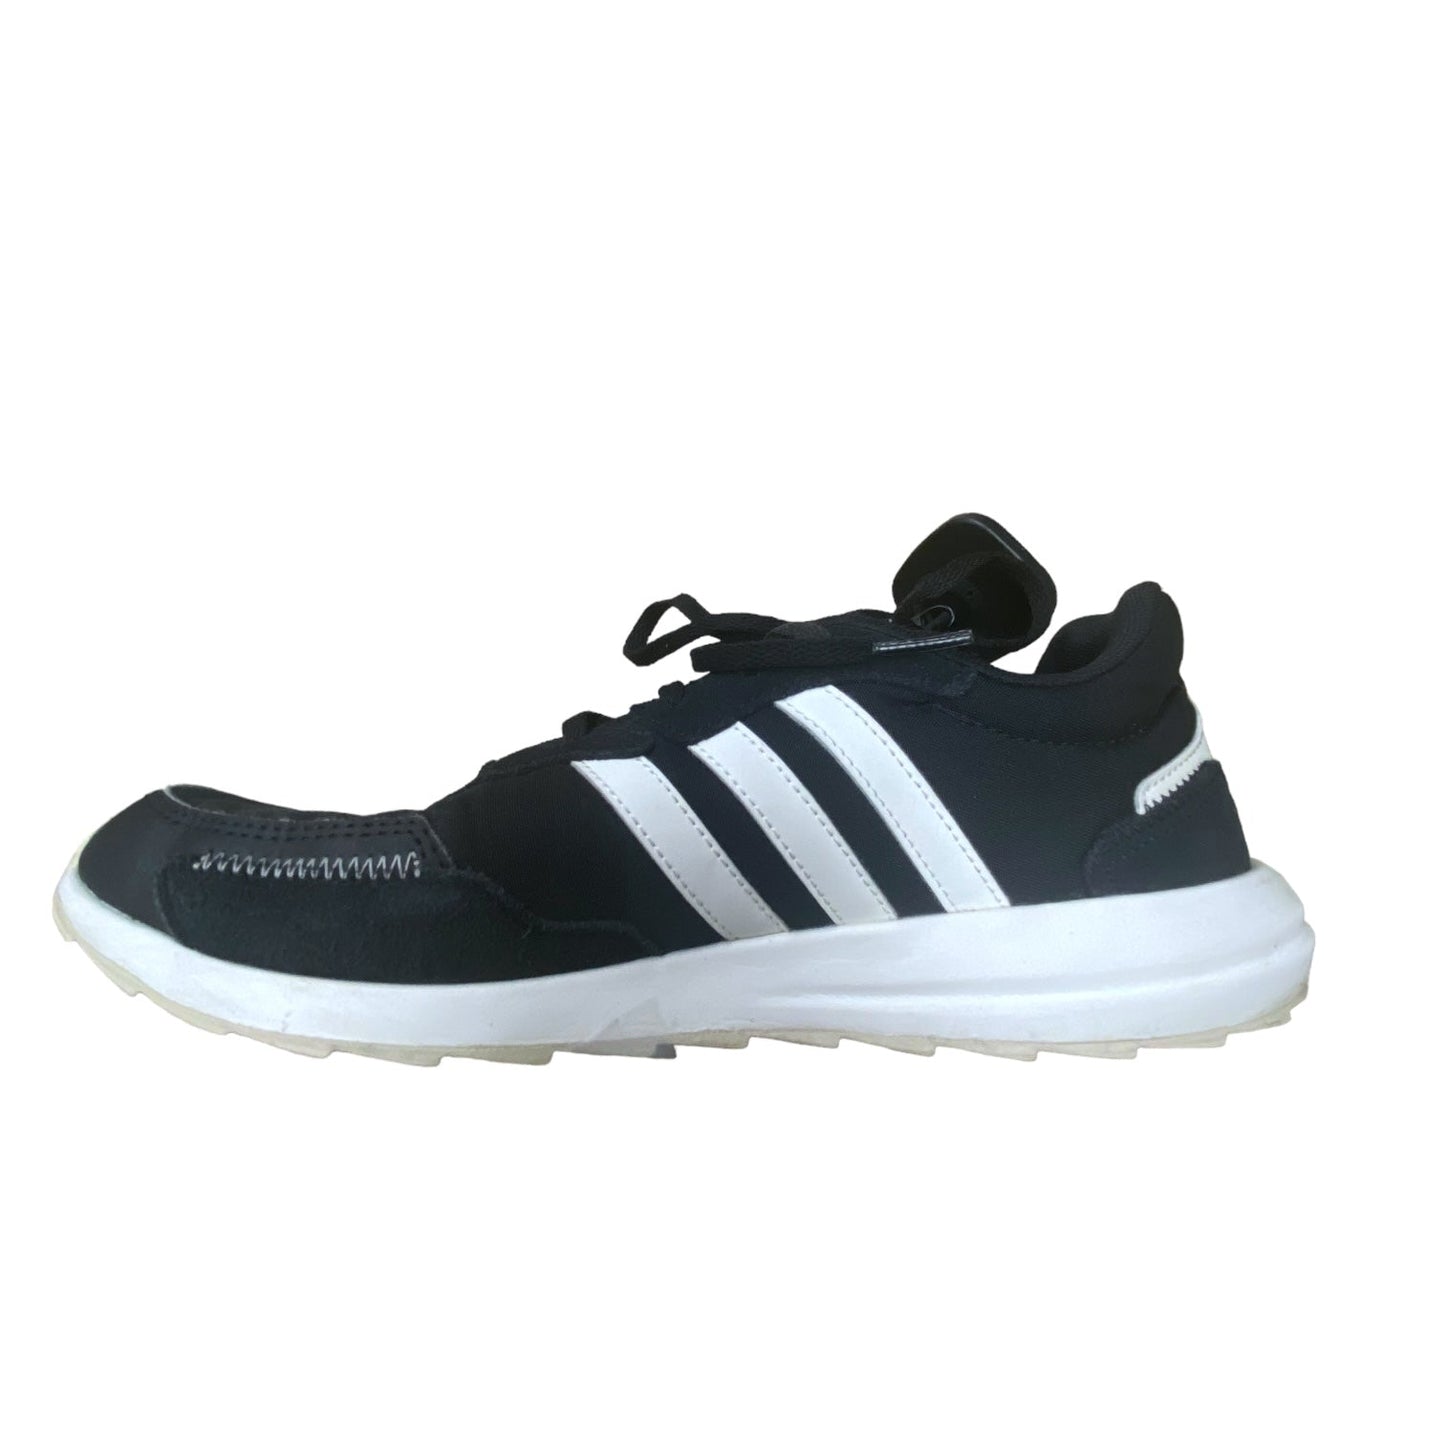 Shoes Athletic By Adidas  Size: 9